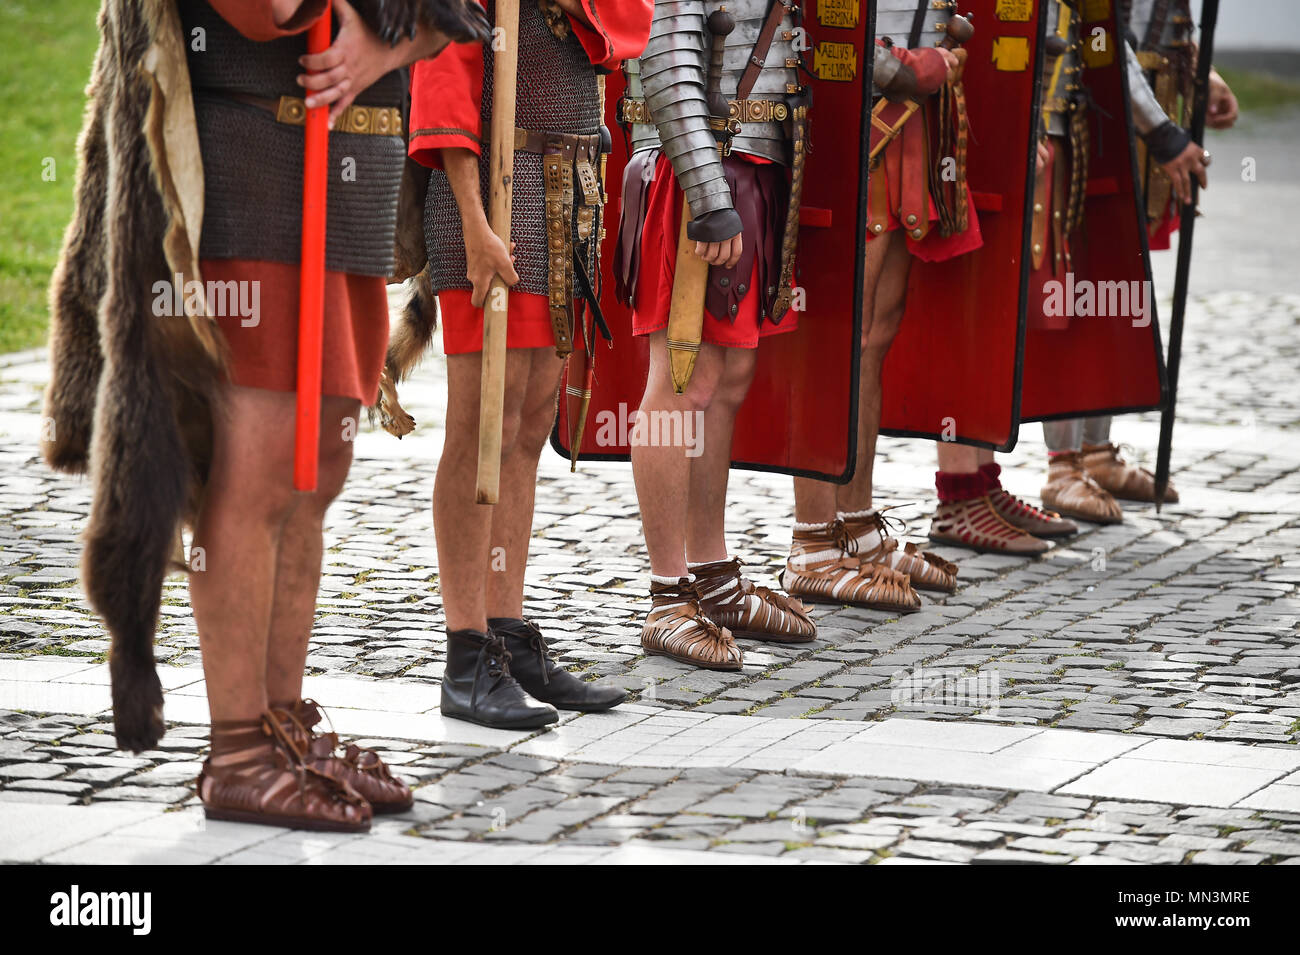 Reenactment detail with roman soldiers uniforms Stock Photo